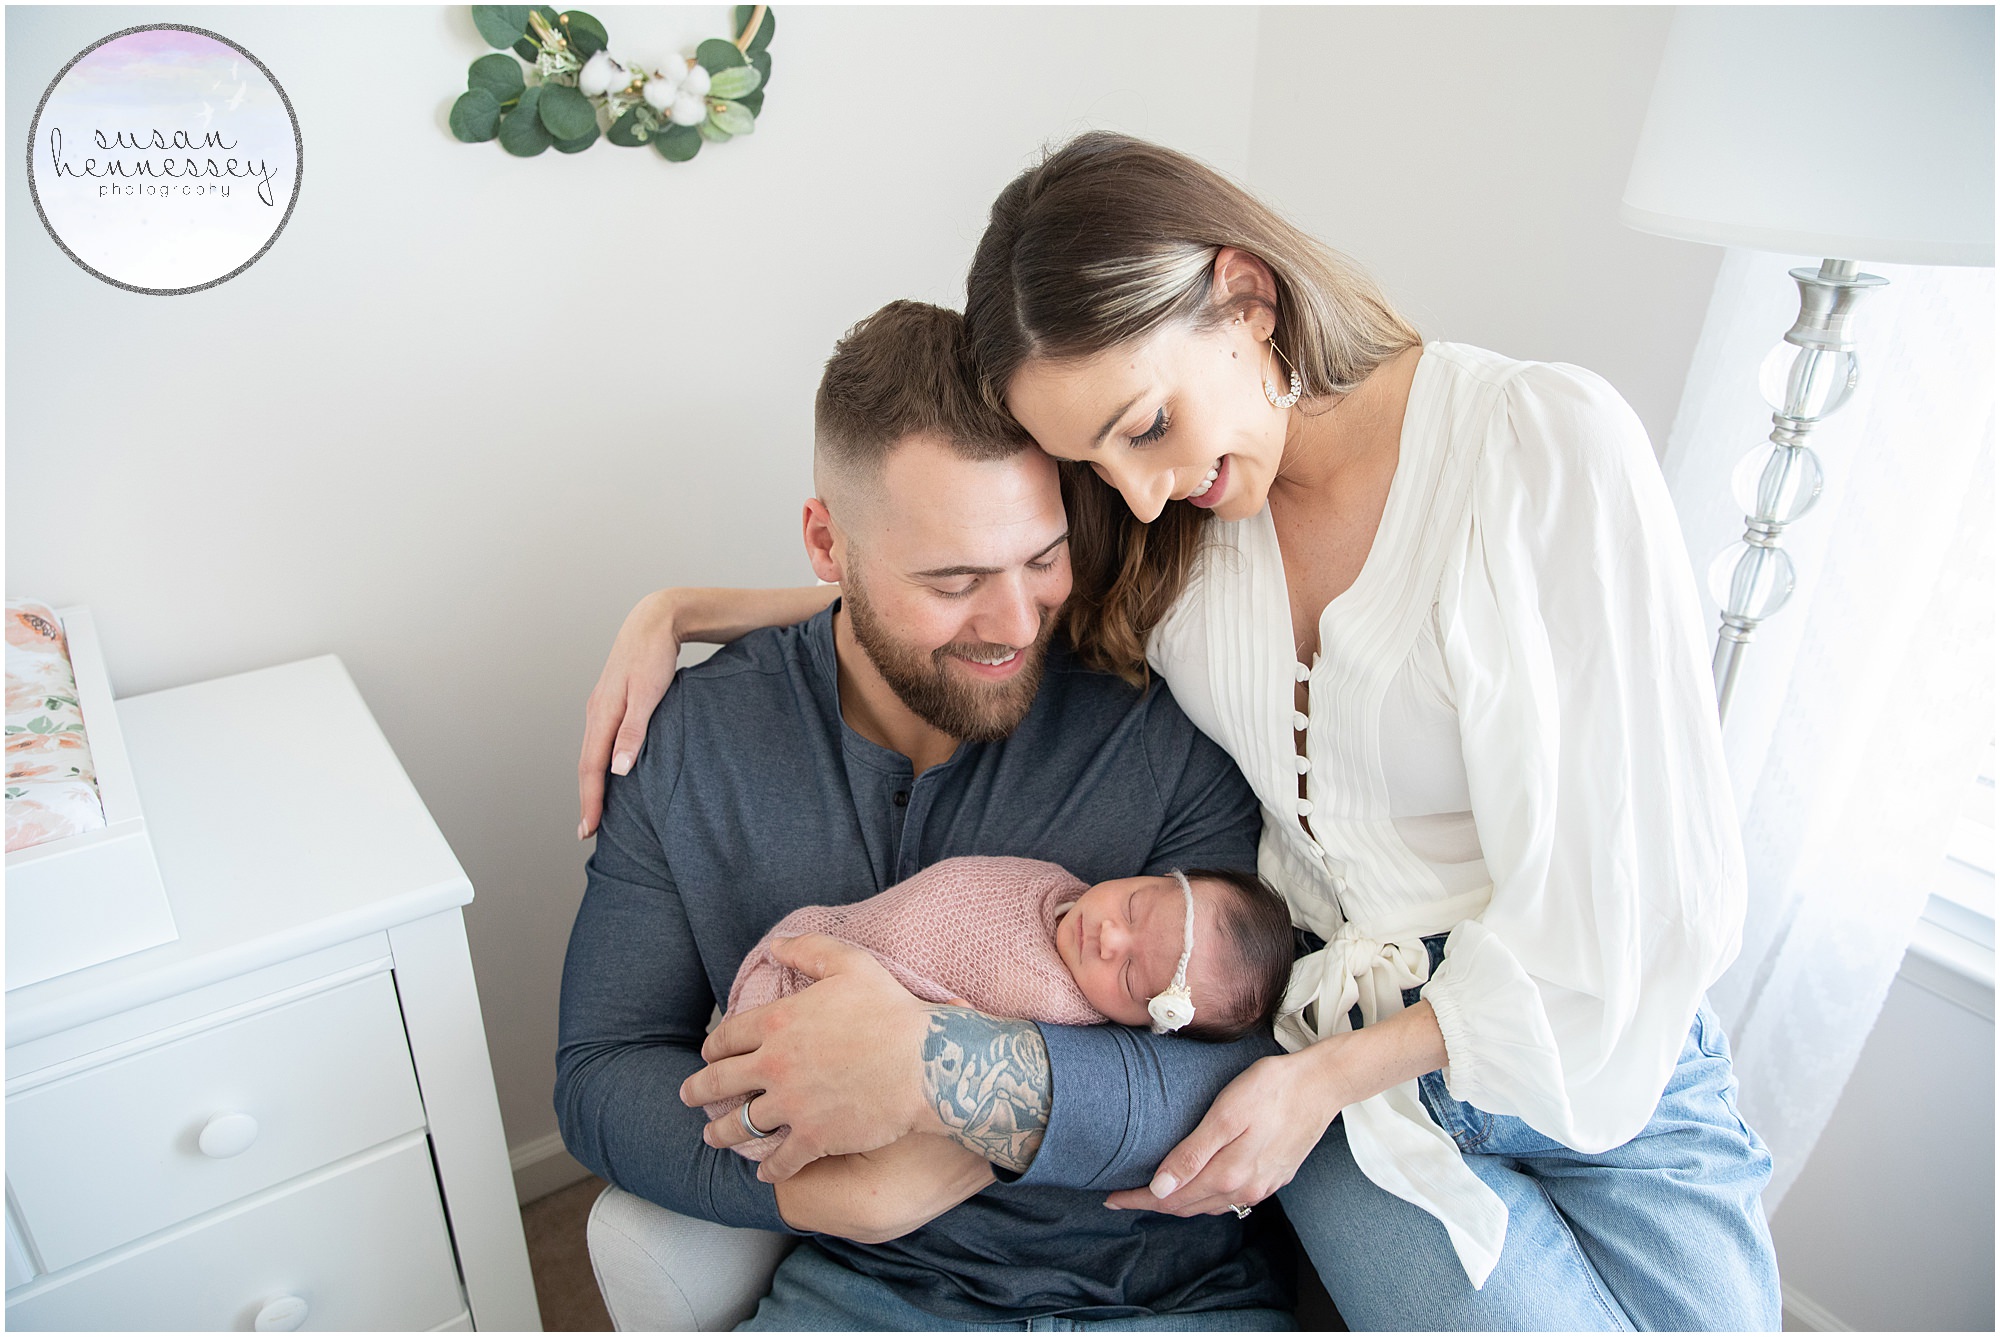 Susan Hennessey Photography is a Moorestown based photographer who offers both in home and in studio newborn sessions.